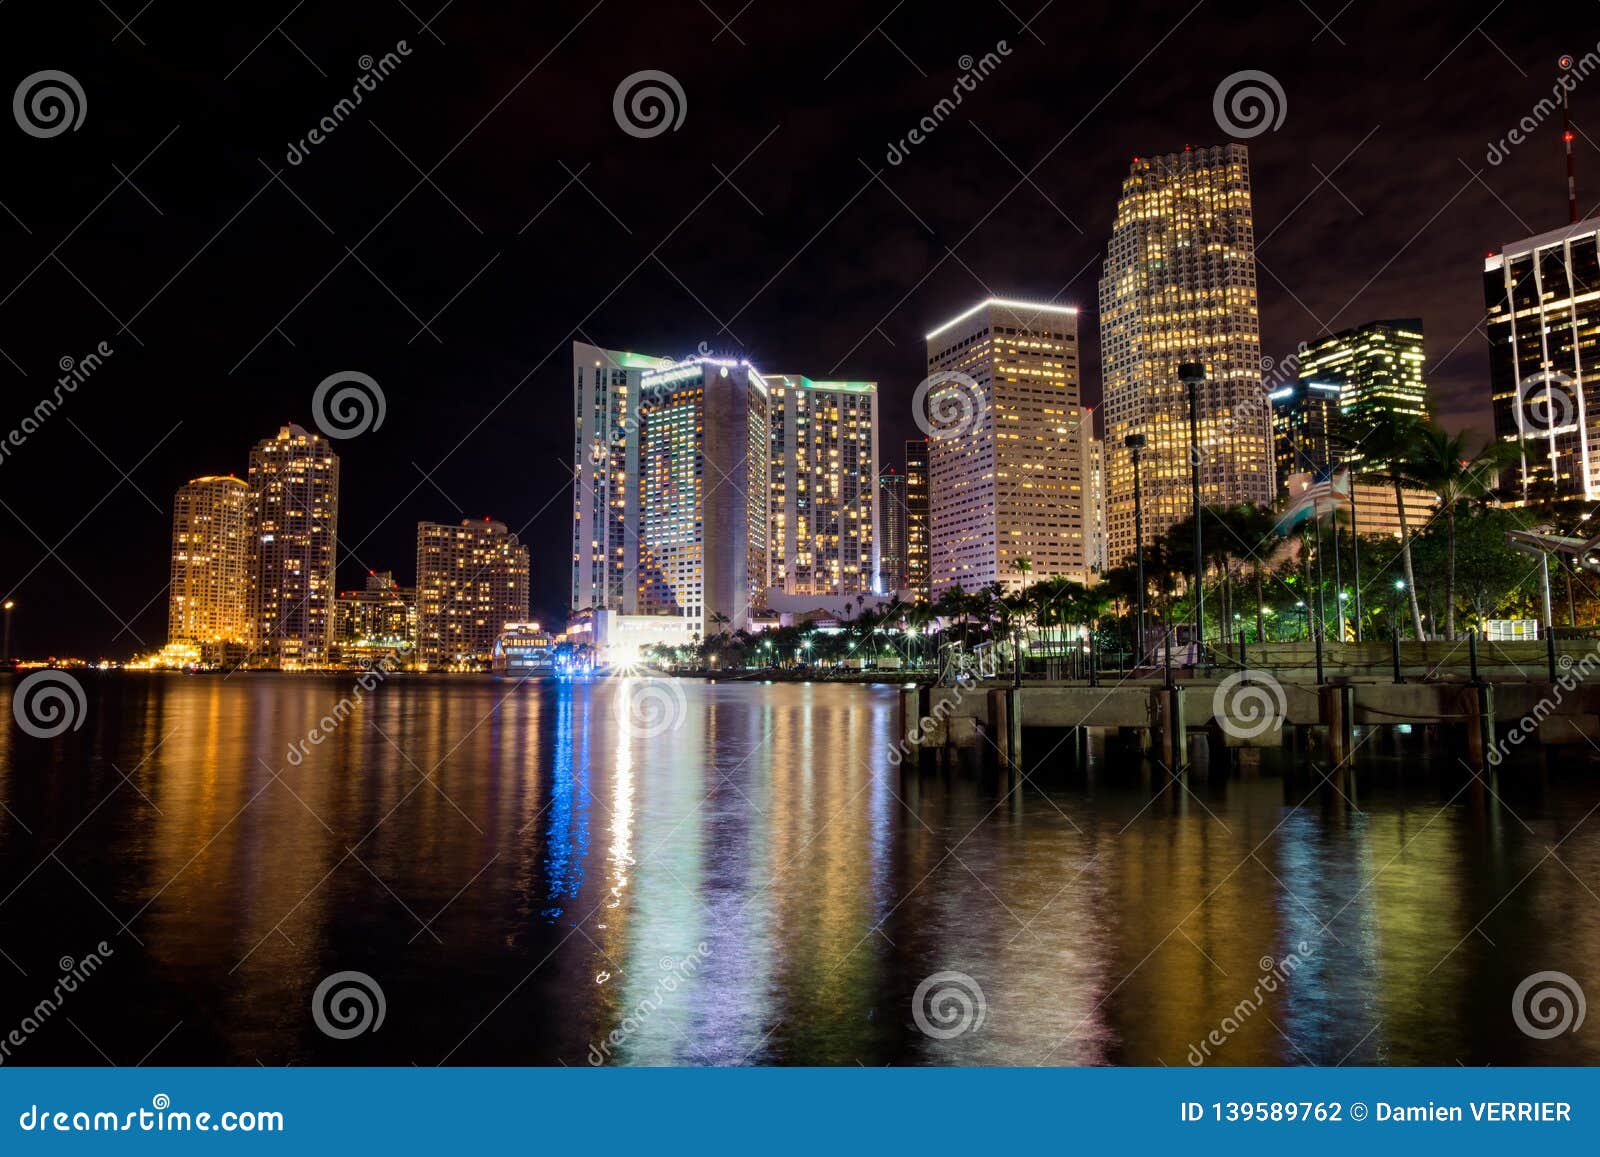 night view of miami downtown from bayside